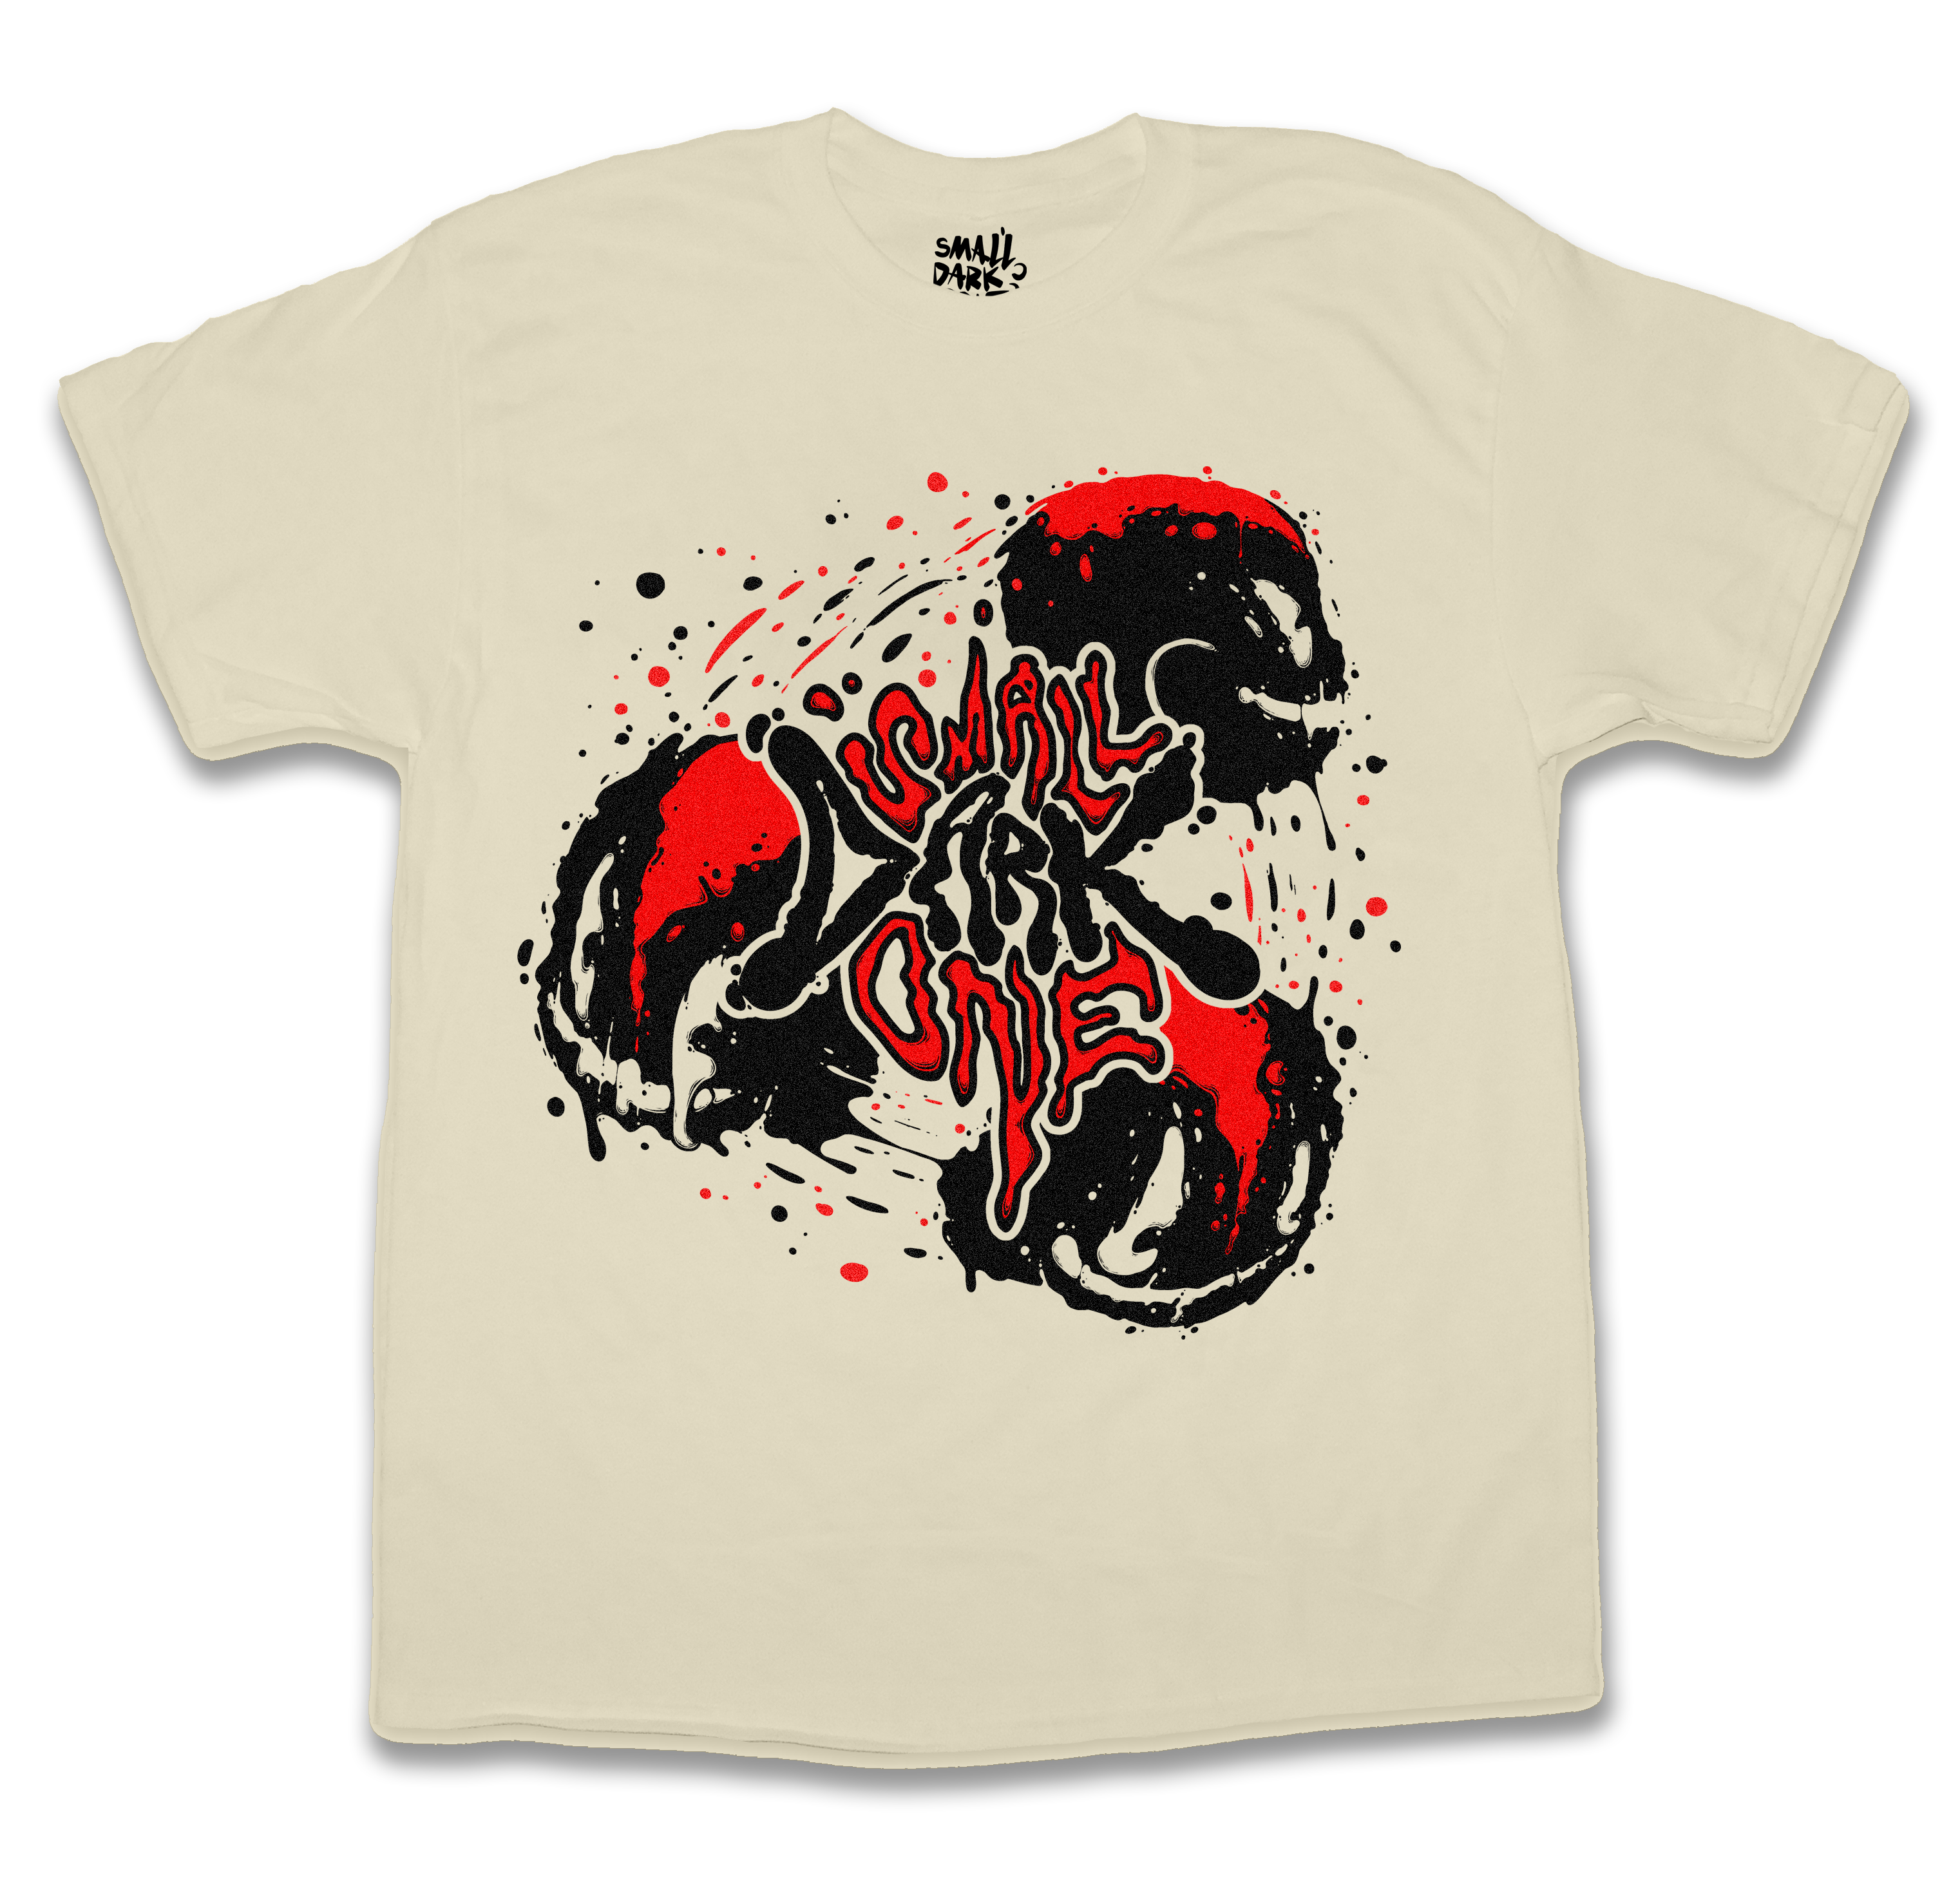 The "Ink" Tee Shirt by Bugslumber for Lil Darkie on Small Dark One